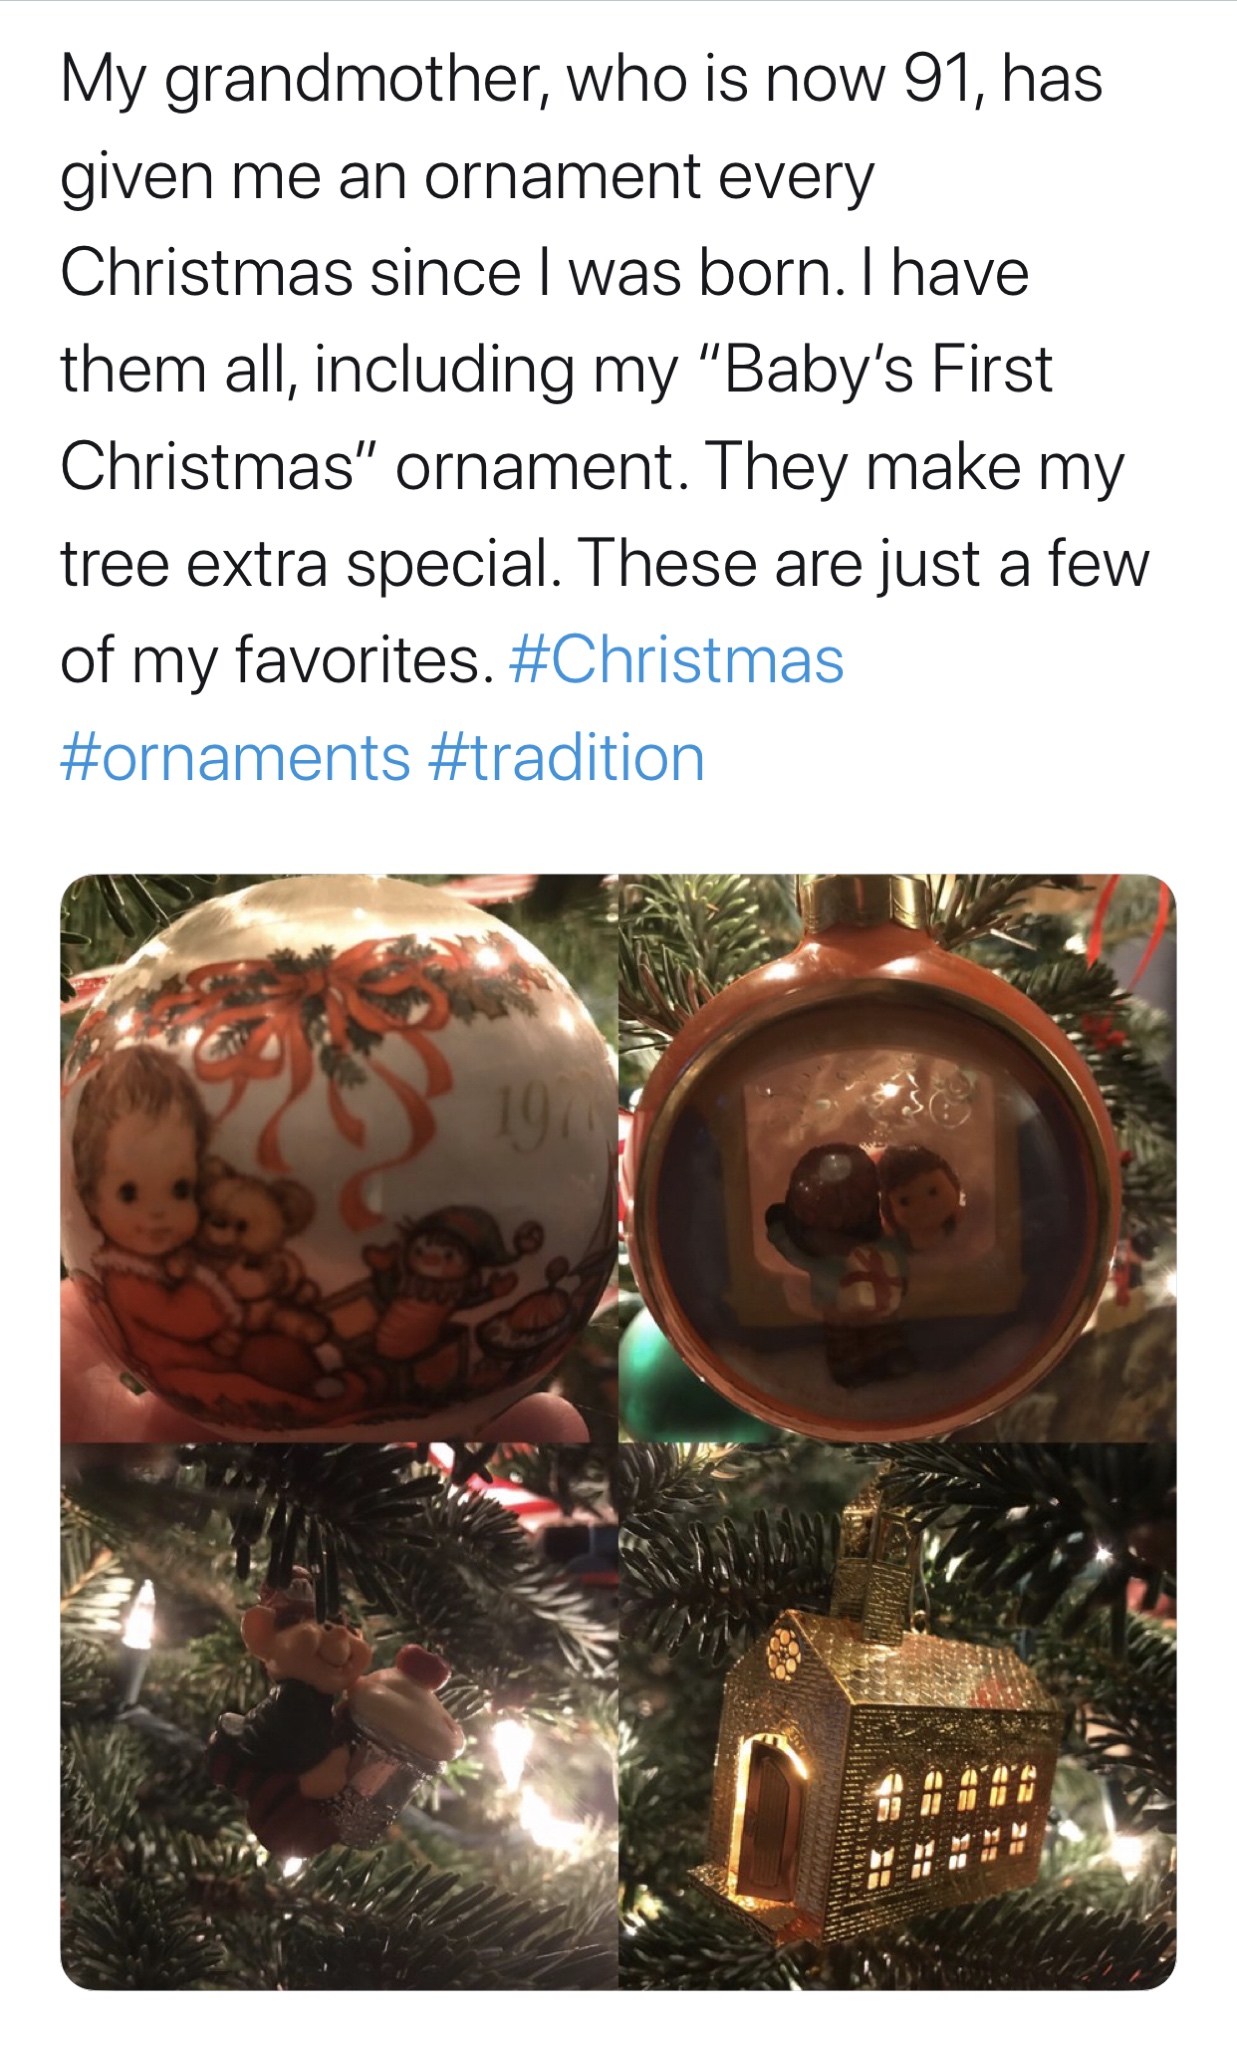 christmas ornament - My grandmother, who is now 91, has given me an ornament every Christmas since I was born. I have them all, including my "Baby's First Christmas" ornament. They make my tree extra special. These are just a few of my favorites.